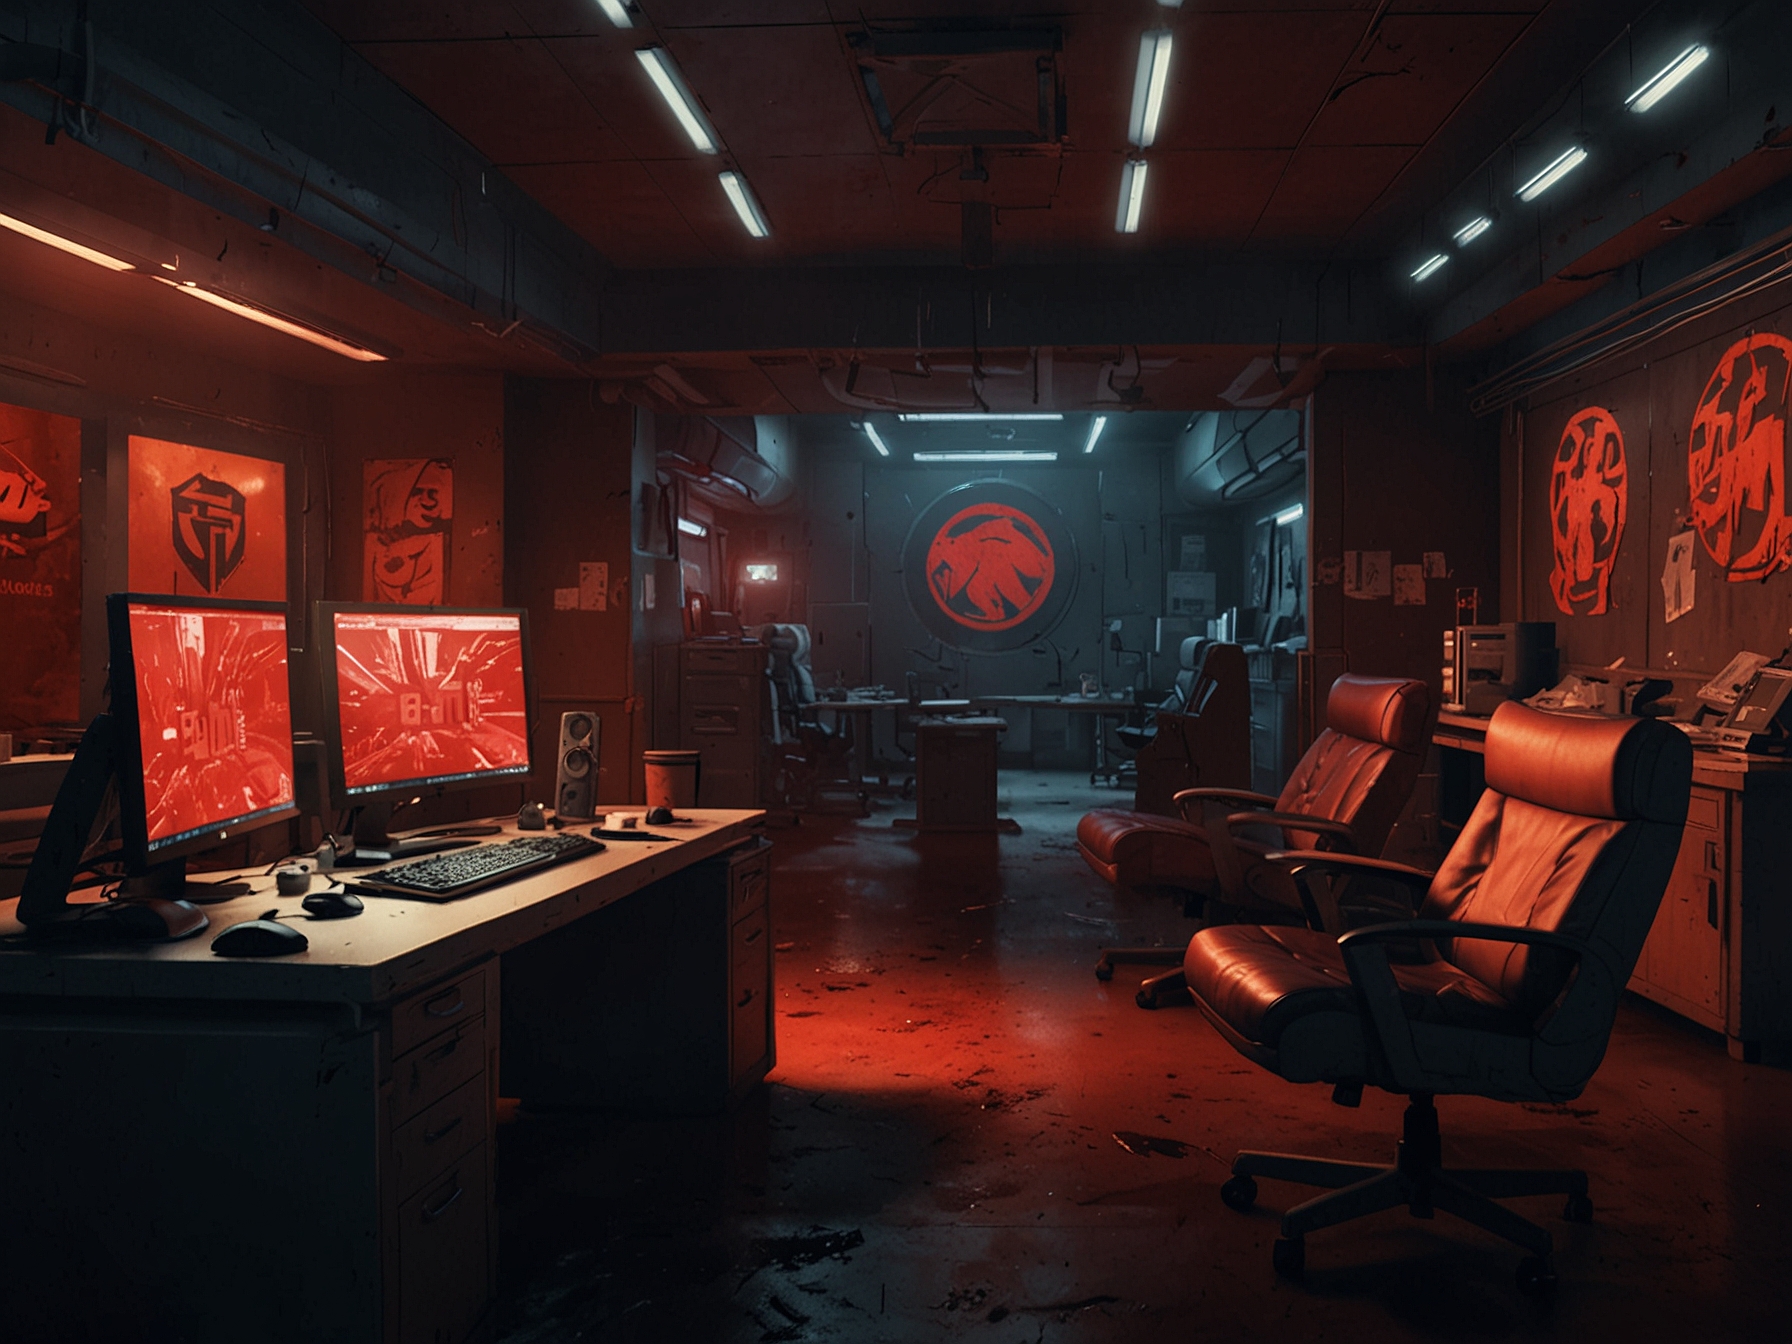 A depiction of Fishlabs’ studio with an overlay of the Red Faction logo, symbolizing the reported layoffs and the halted production of the anticipated game.